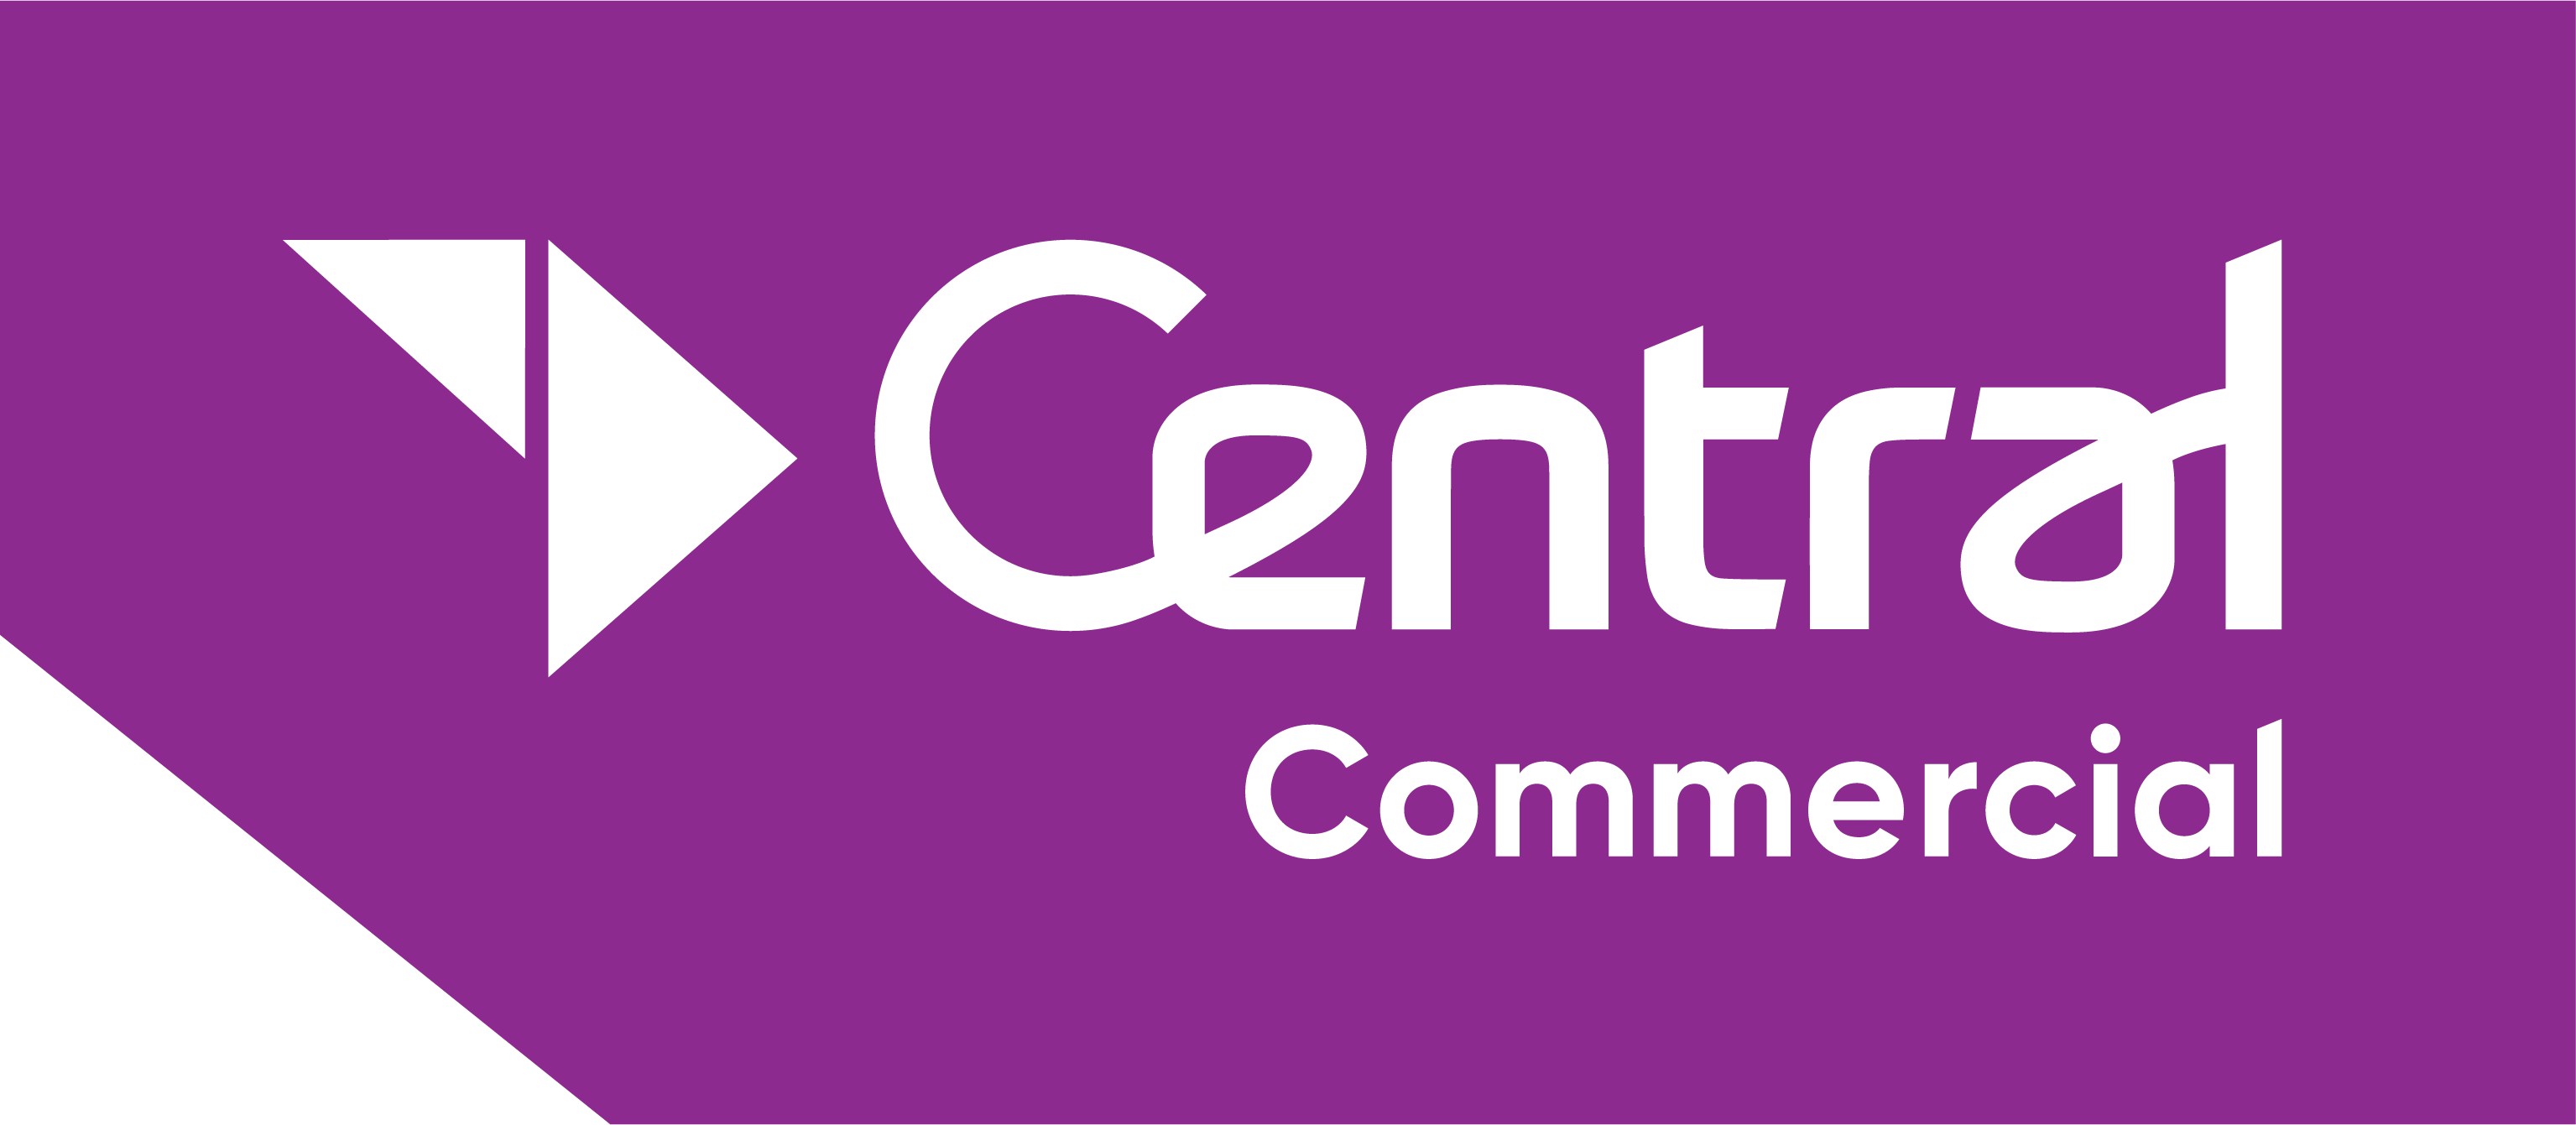 MASTER_Central_Commercial_Logo_RGB